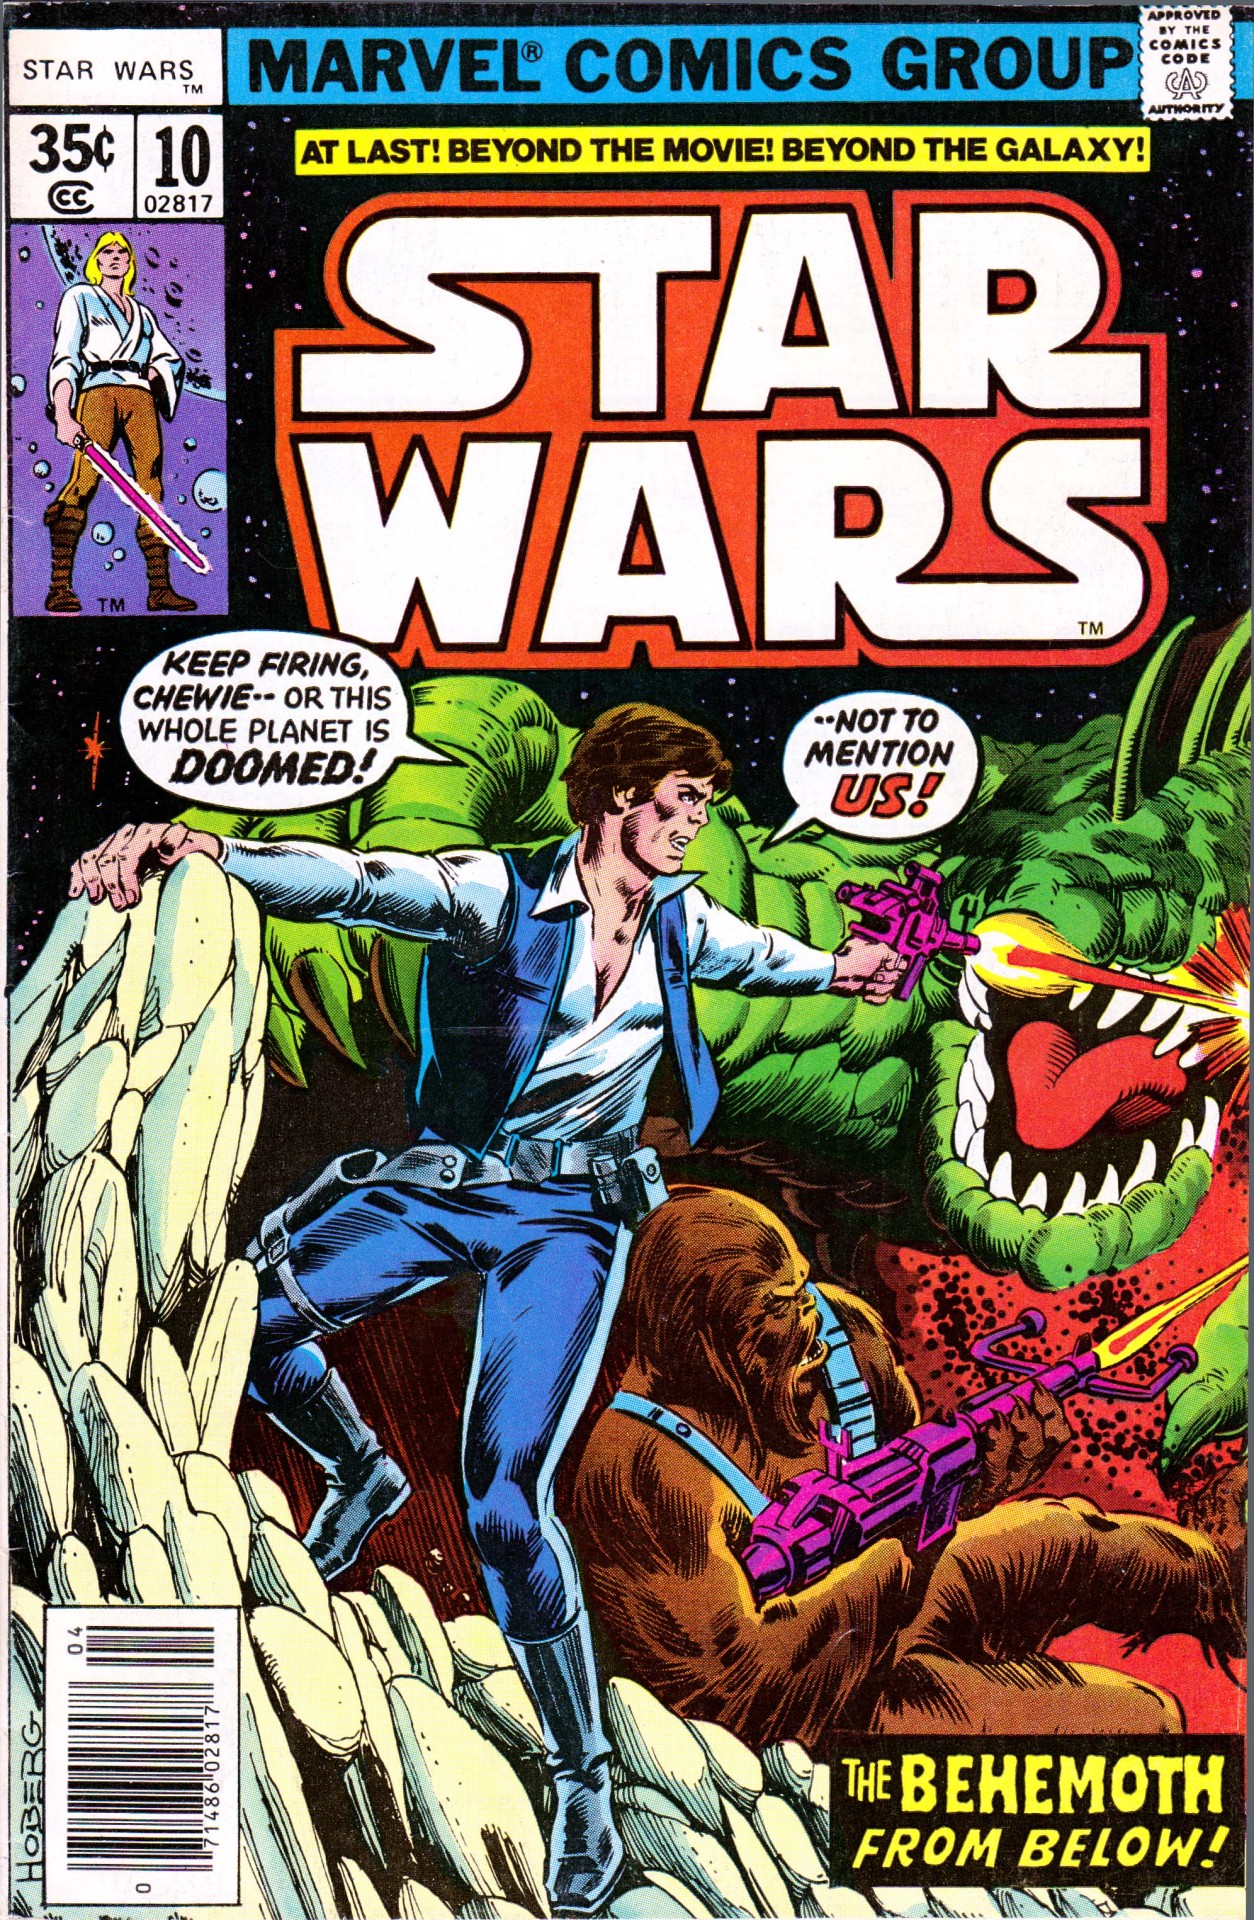 STAR WARS Mens Comic Book Cover January 1978 Han Solo and Chewbacca T-Shirt